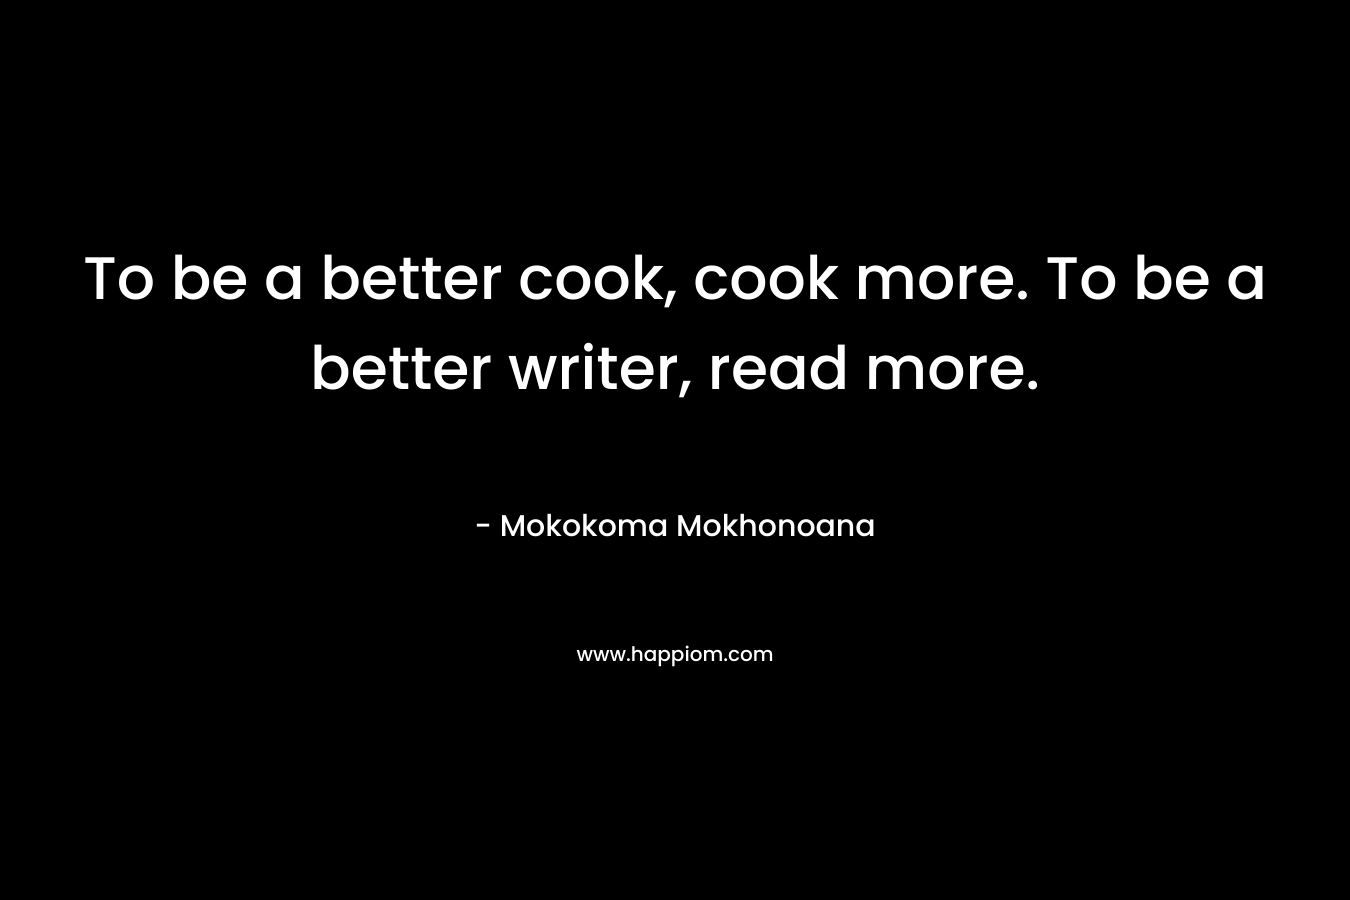 To be a better cook, cook more. To be a better writer, read more.